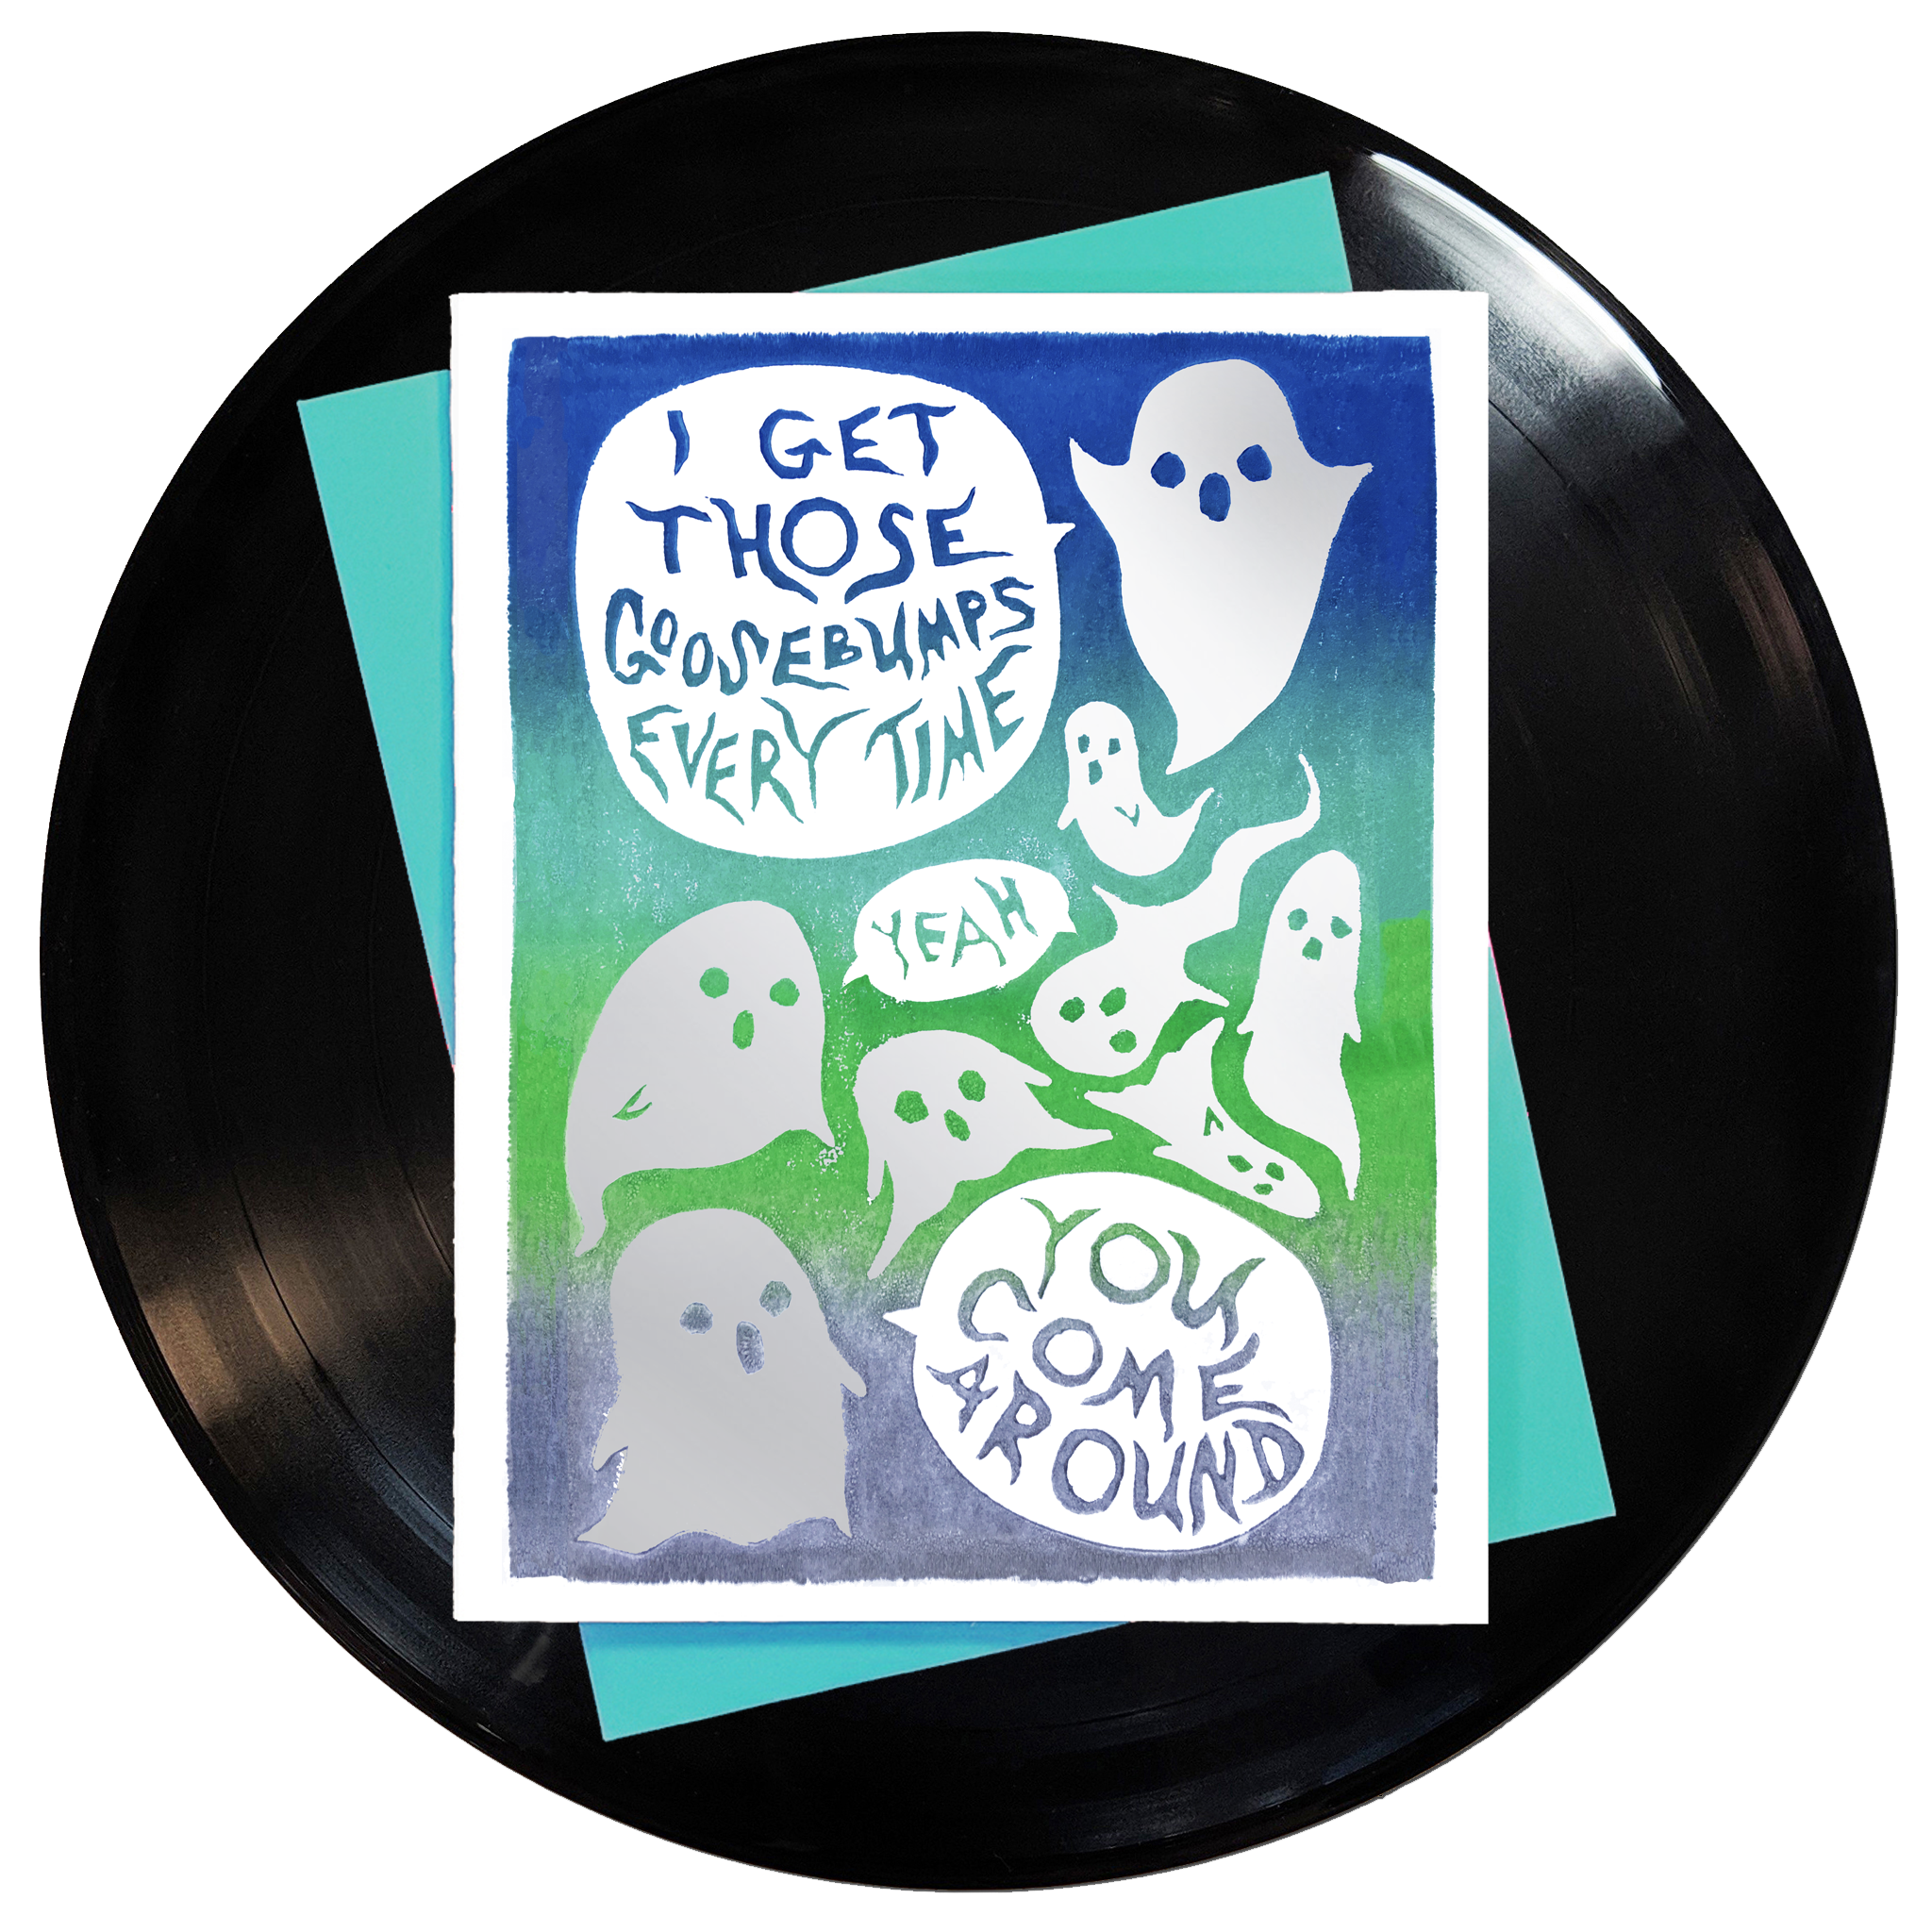 I Get Those Goosebumps Greeting Card 6-Pack Inspired By Music